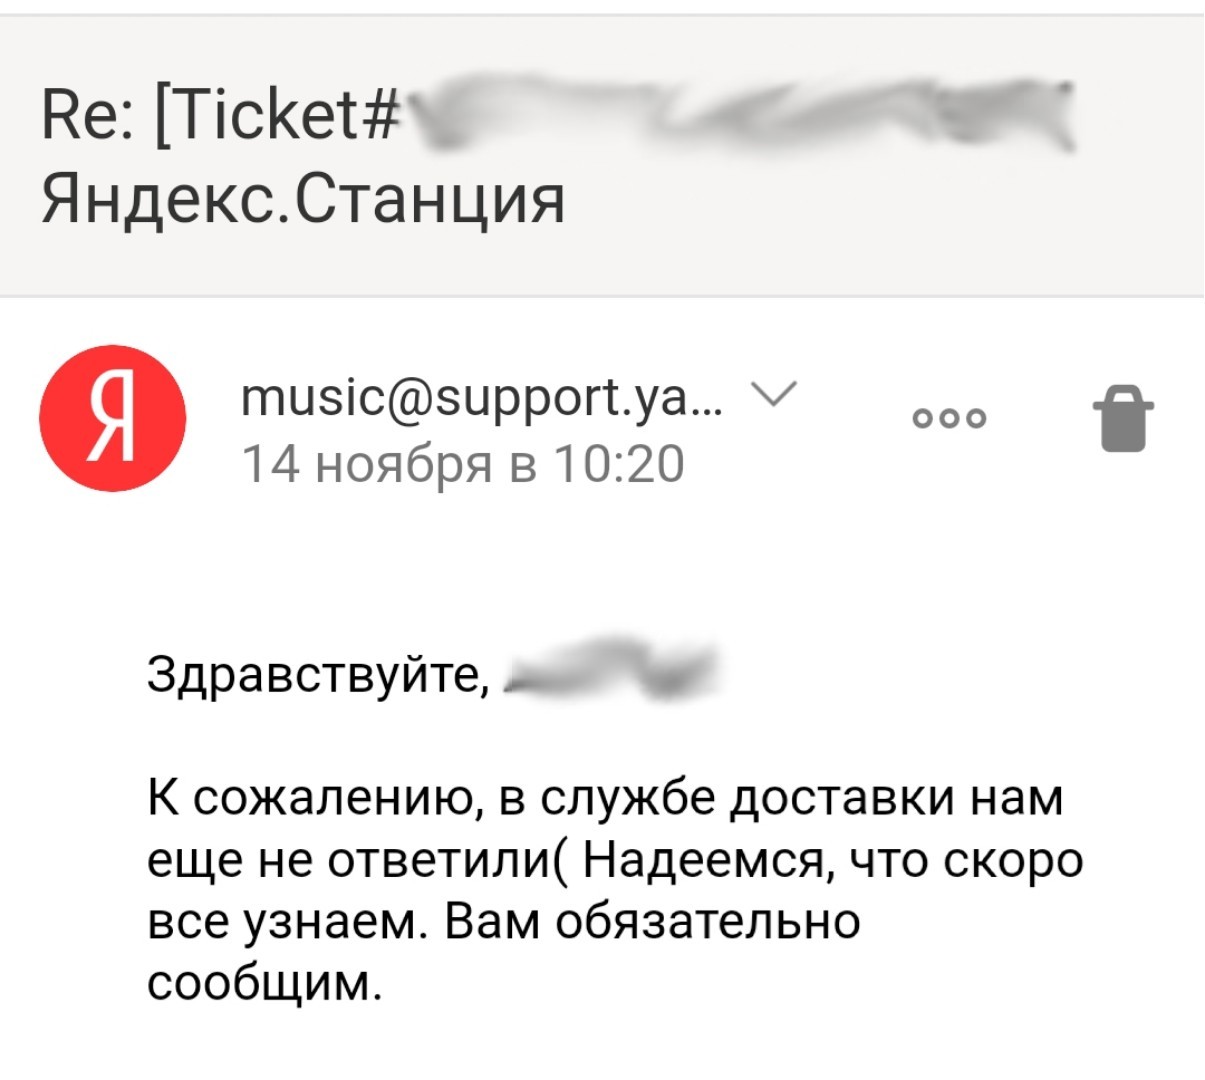 Yandex.Station by subscription. Problems with delivery. - My, No rating, Yandex., Yandex Station, Delivery, Support service, Yandex Music, Longpost